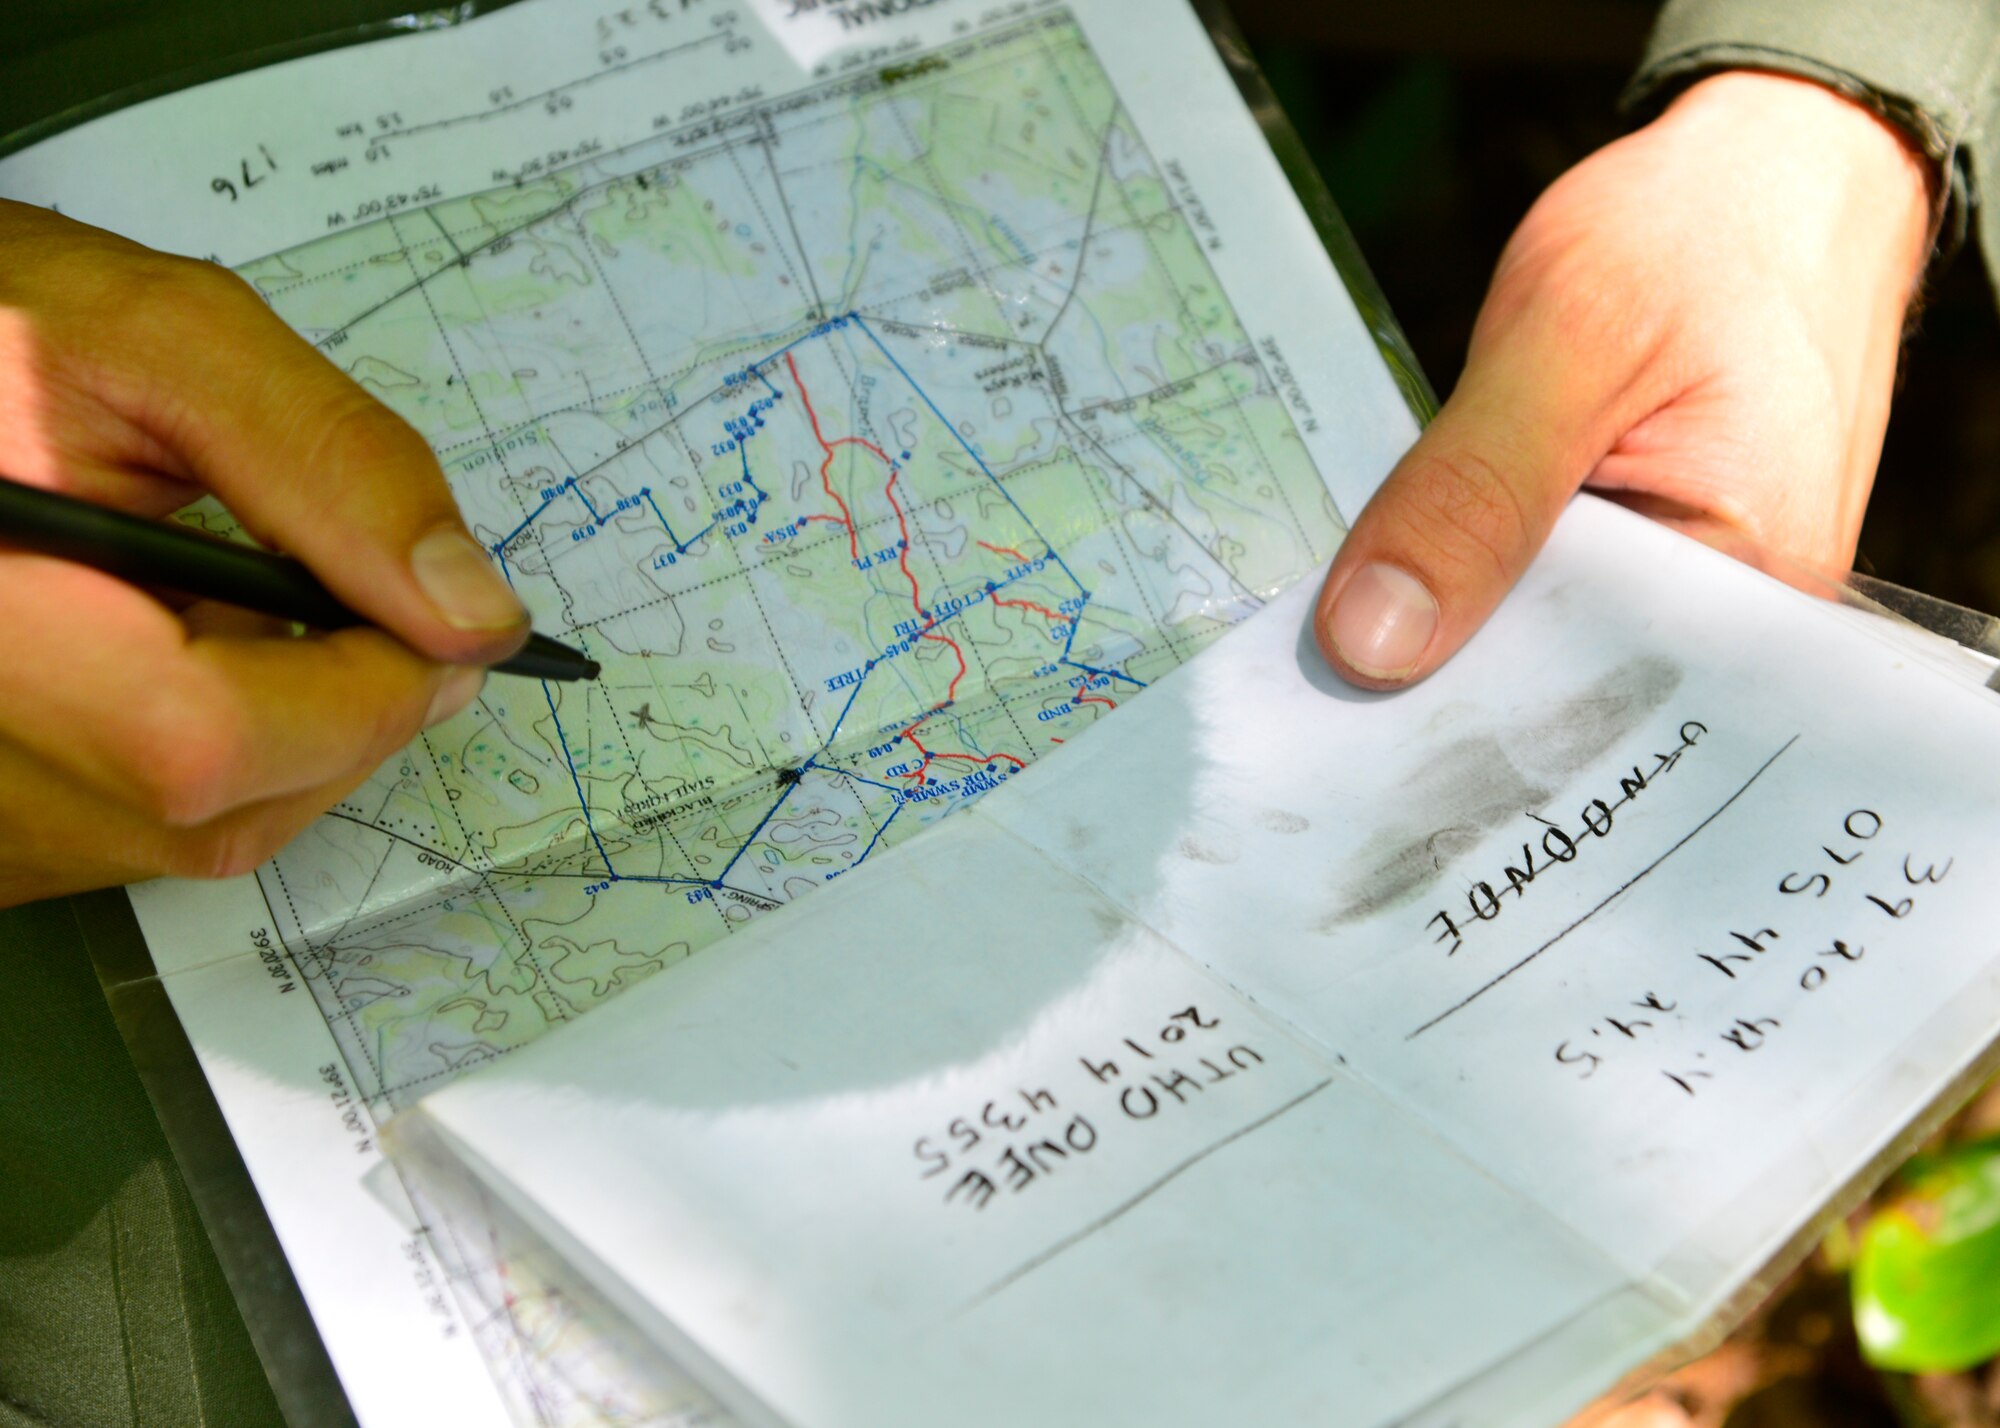 Senior Airman Leo Avila, 709th Airlift Squadron C-5M Super Galaxy engineer, uses coordinates to mark his crew’s position on a map during a combat survival training exercise July 16, 2015, at the Blackbird State Forest near Smyrna, Del. The crew was equipped with a compass and a map to navigate several miles of woodland and marshy terrain during the exercise. (U.S. Air Force photo/Airman 1st Class William Johnson)